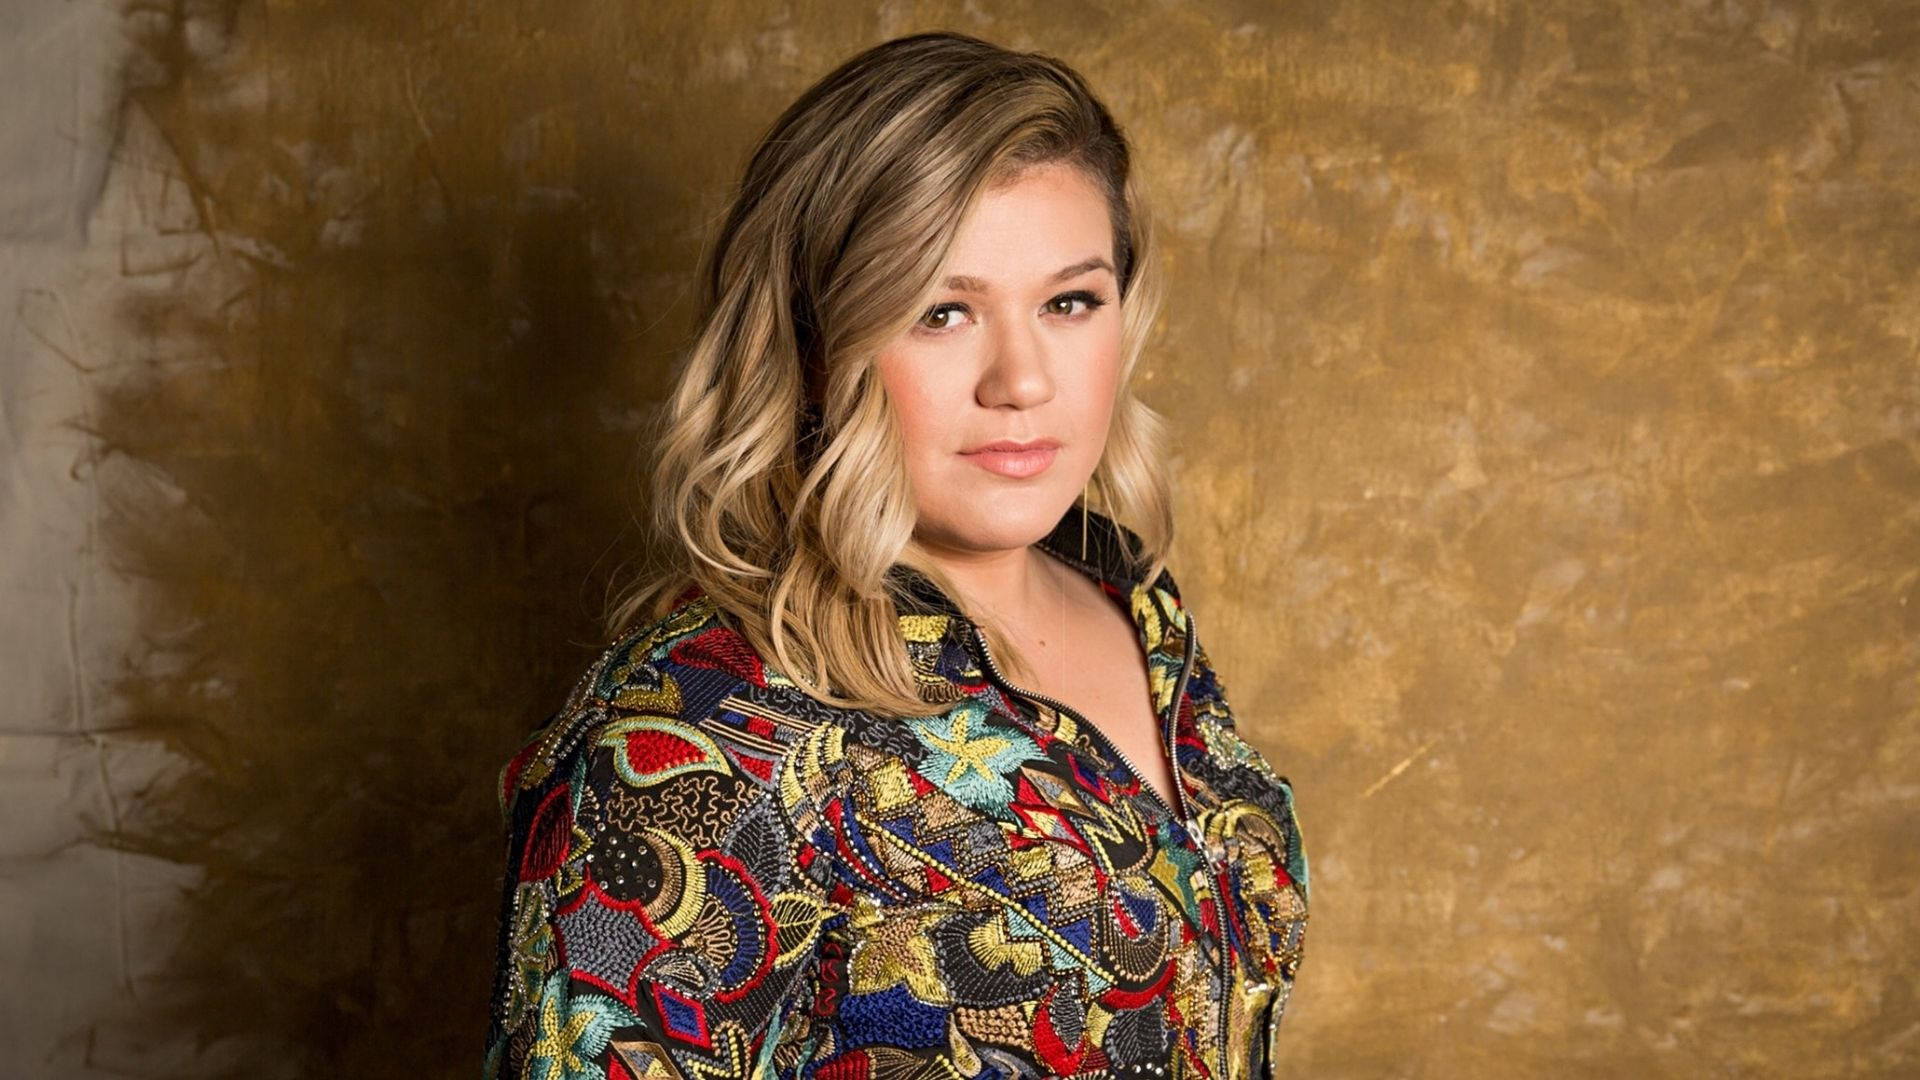 Kelly Clarkson In Colorful Dress